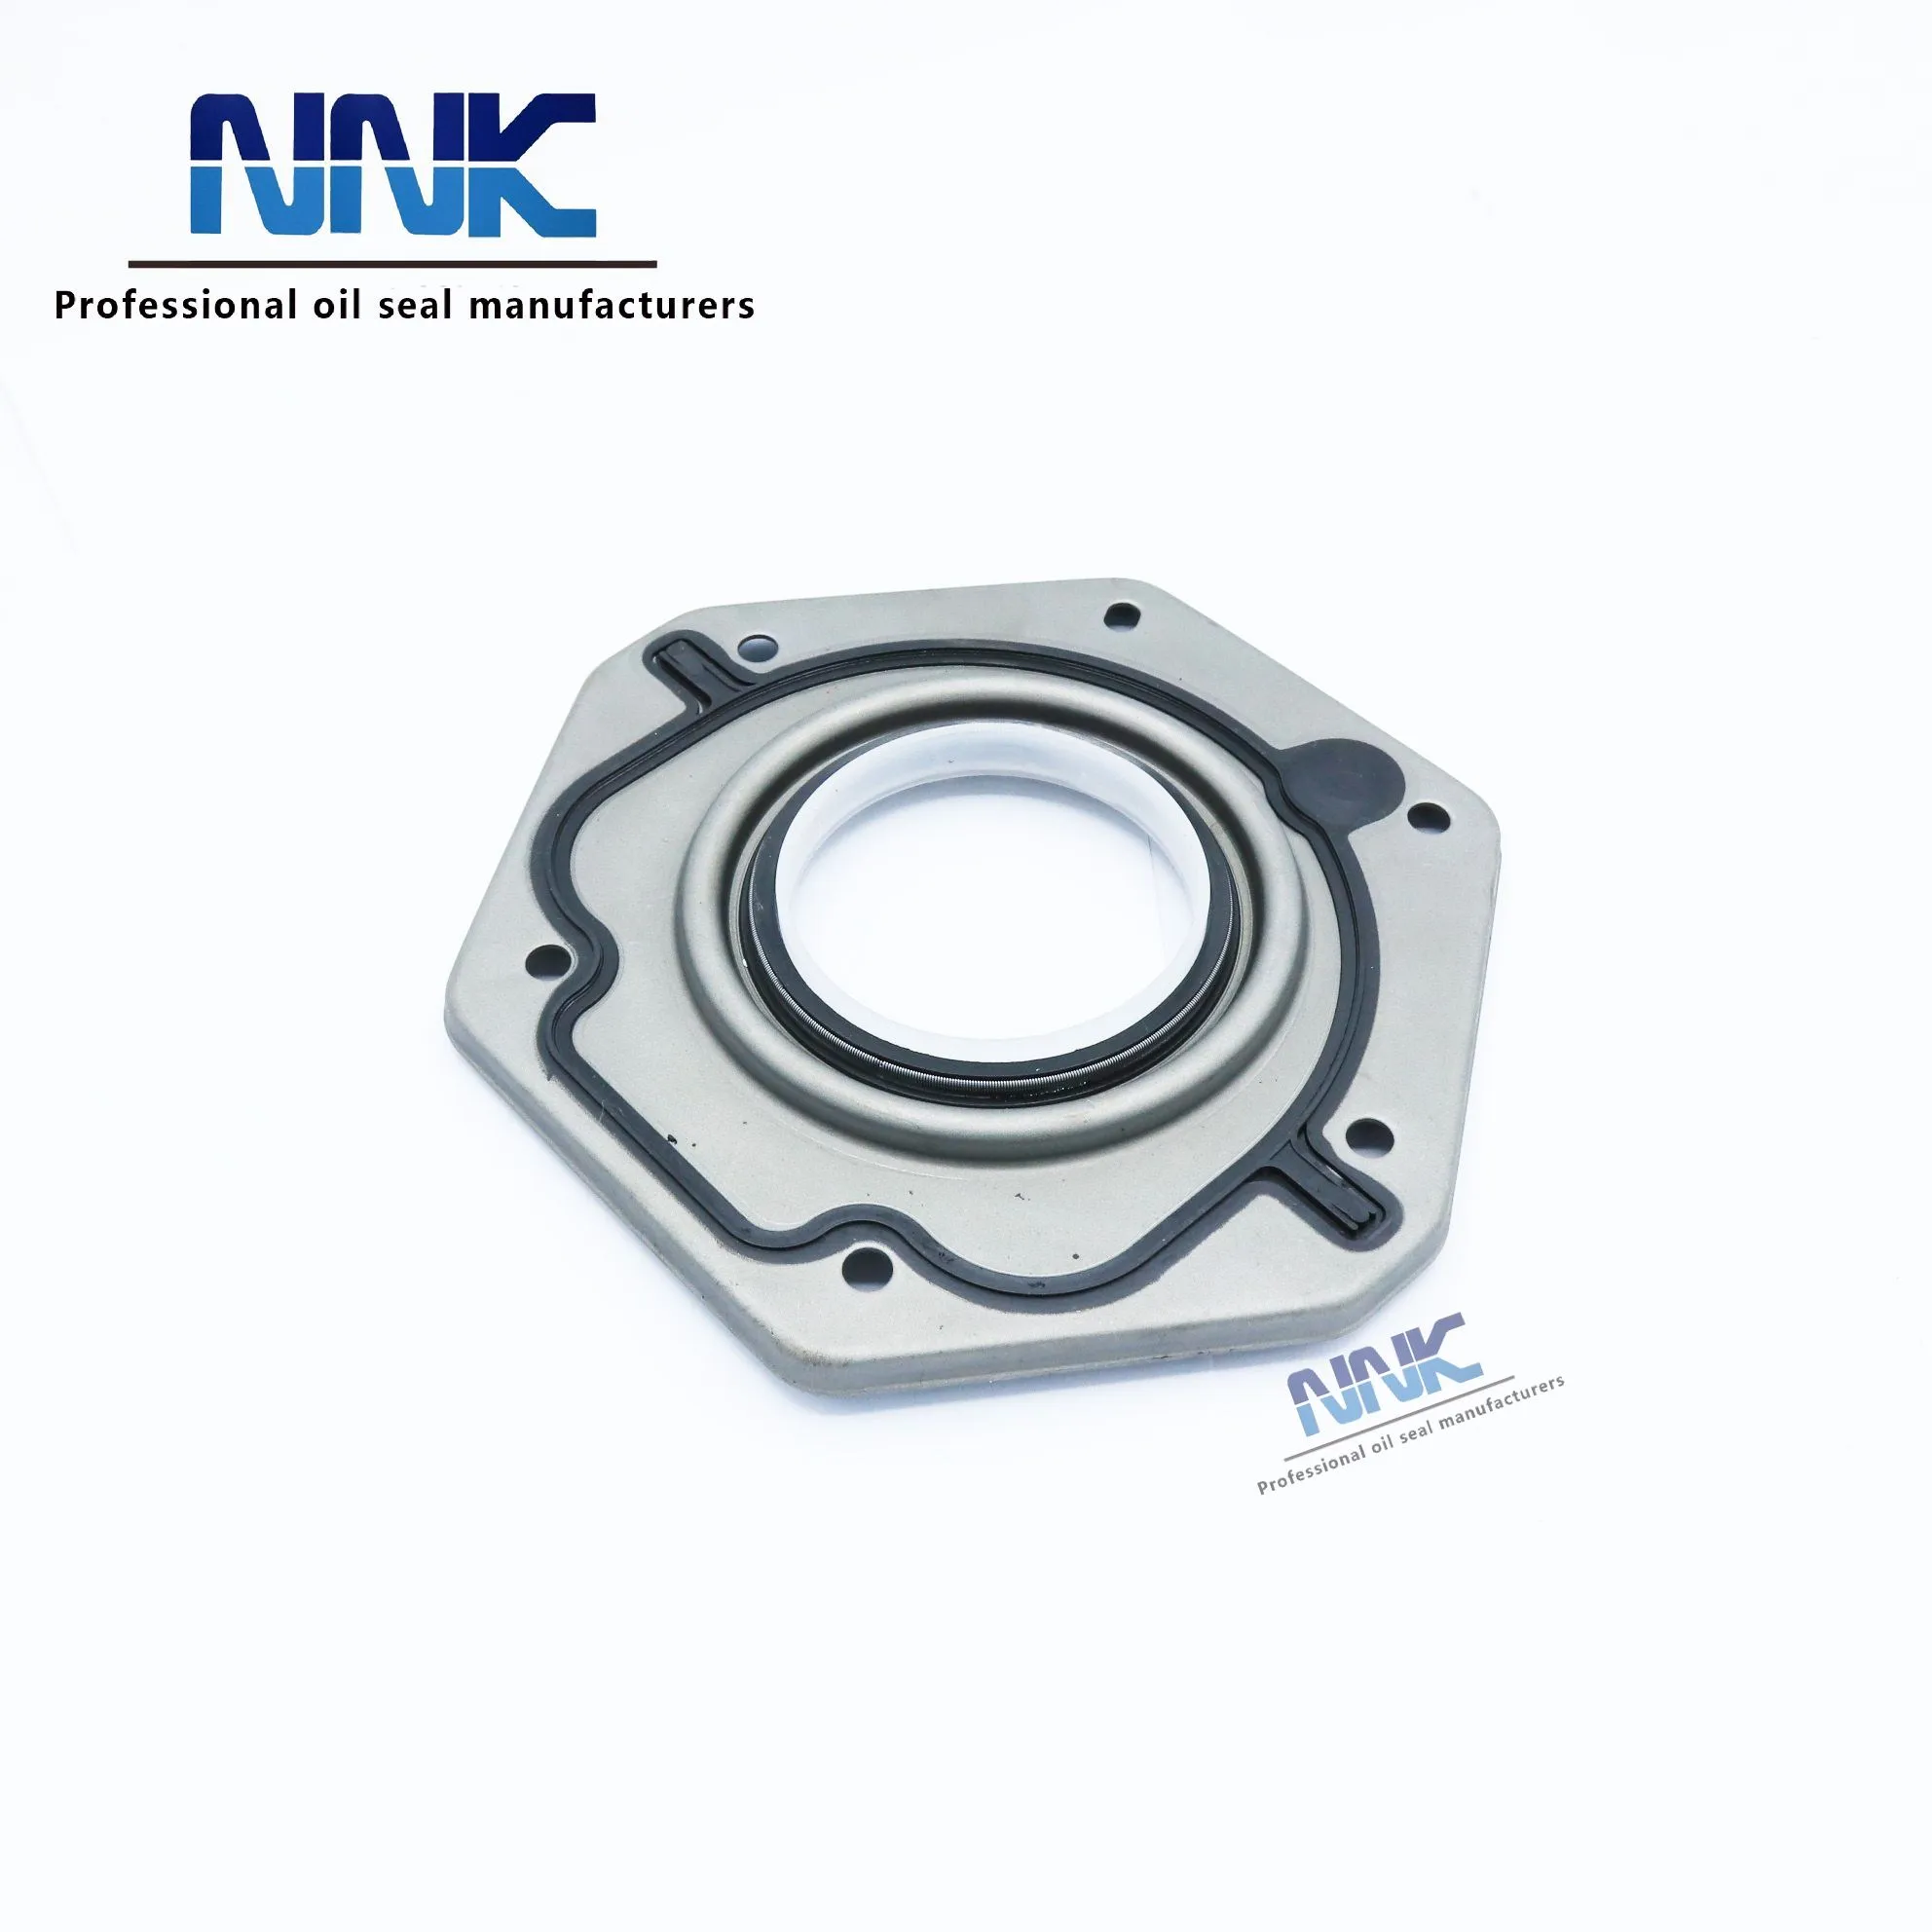 OE504086312 Crankshaft Oil Seal For Iveco Daily